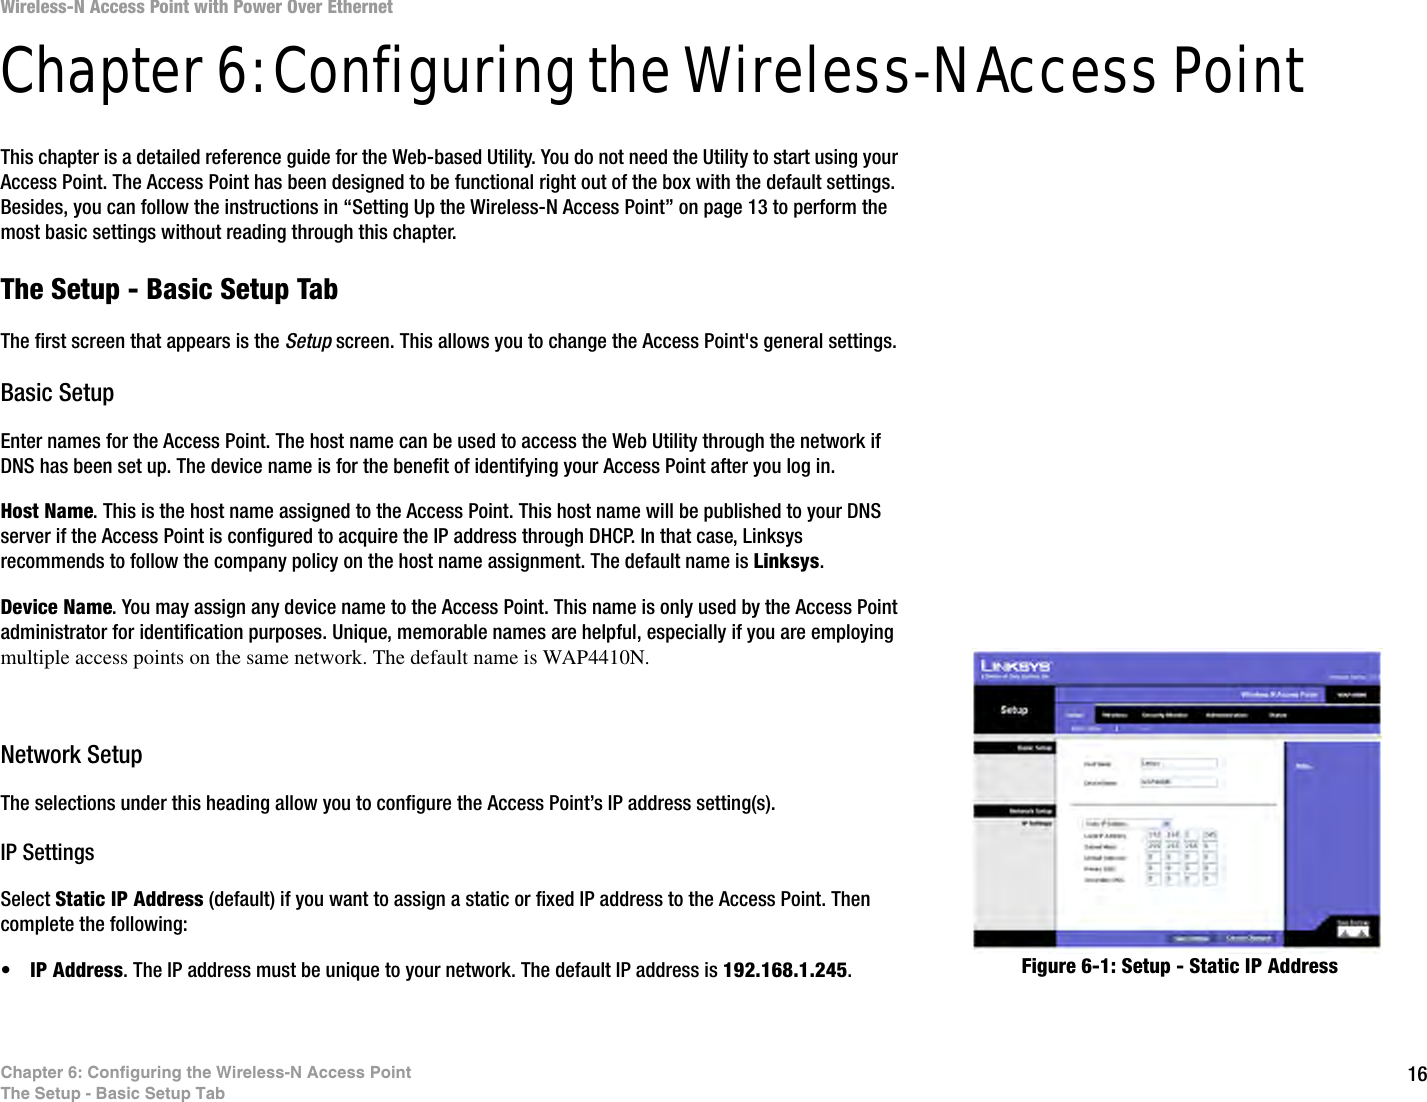 16Chapter 6: Configuring the Wireless-N Access PointThe Setup - Basic Setup TabWireless-N Access Point with Power Over EthernetChapter 6: Configuring the Wireless-N Access PointThis chapter is a detailed reference guide for the Web-based Utility. You do not need the Utility to start using your Access Point. The Access Point has been designed to be functional right out of the box with the default settings. Besides, you can follow the instructions in “Setting Up the Wireless-N Access Point” on page 13 to perform the most basic settings without reading through this chapter. The Setup - Basic Setup TabThe first screen that appears is the Setup screen. This allows you to change the Access Point&apos;s general settings.Basic SetupEnter names for the Access Point. The host name can be used to access the Web Utility through the network if DNS has been set up. The device name is for the benefit of identifying your Access Point after you log in.Host Name. This is the host name assigned to the Access Point. This host name will be published to your DNS server if the Access Point is configured to acquire the IP address through DHCP. In that case, Linksys recommends to follow the company policy on the host name assignment. The default name is Linksys.Device Name. You may assign any device name to the Access Point. This name is only used by the Access Point administrator for identification purposes. Unique, memorable names are helpful, especially if you are employing multiple access points on the same network. The default name is WAP4410N.Network SetupThe selections under this heading allow you to configure the Access Point’s IP address setting(s).IP SettingsSelect Static IP Address (default) if you want to assign a static or fixed IP address to the Access Point. Then complete the following:•IP Address. The IP address must be unique to your network. The default IP address is 192.168.1.245.Figure 6-1: Setup - Static IP Address